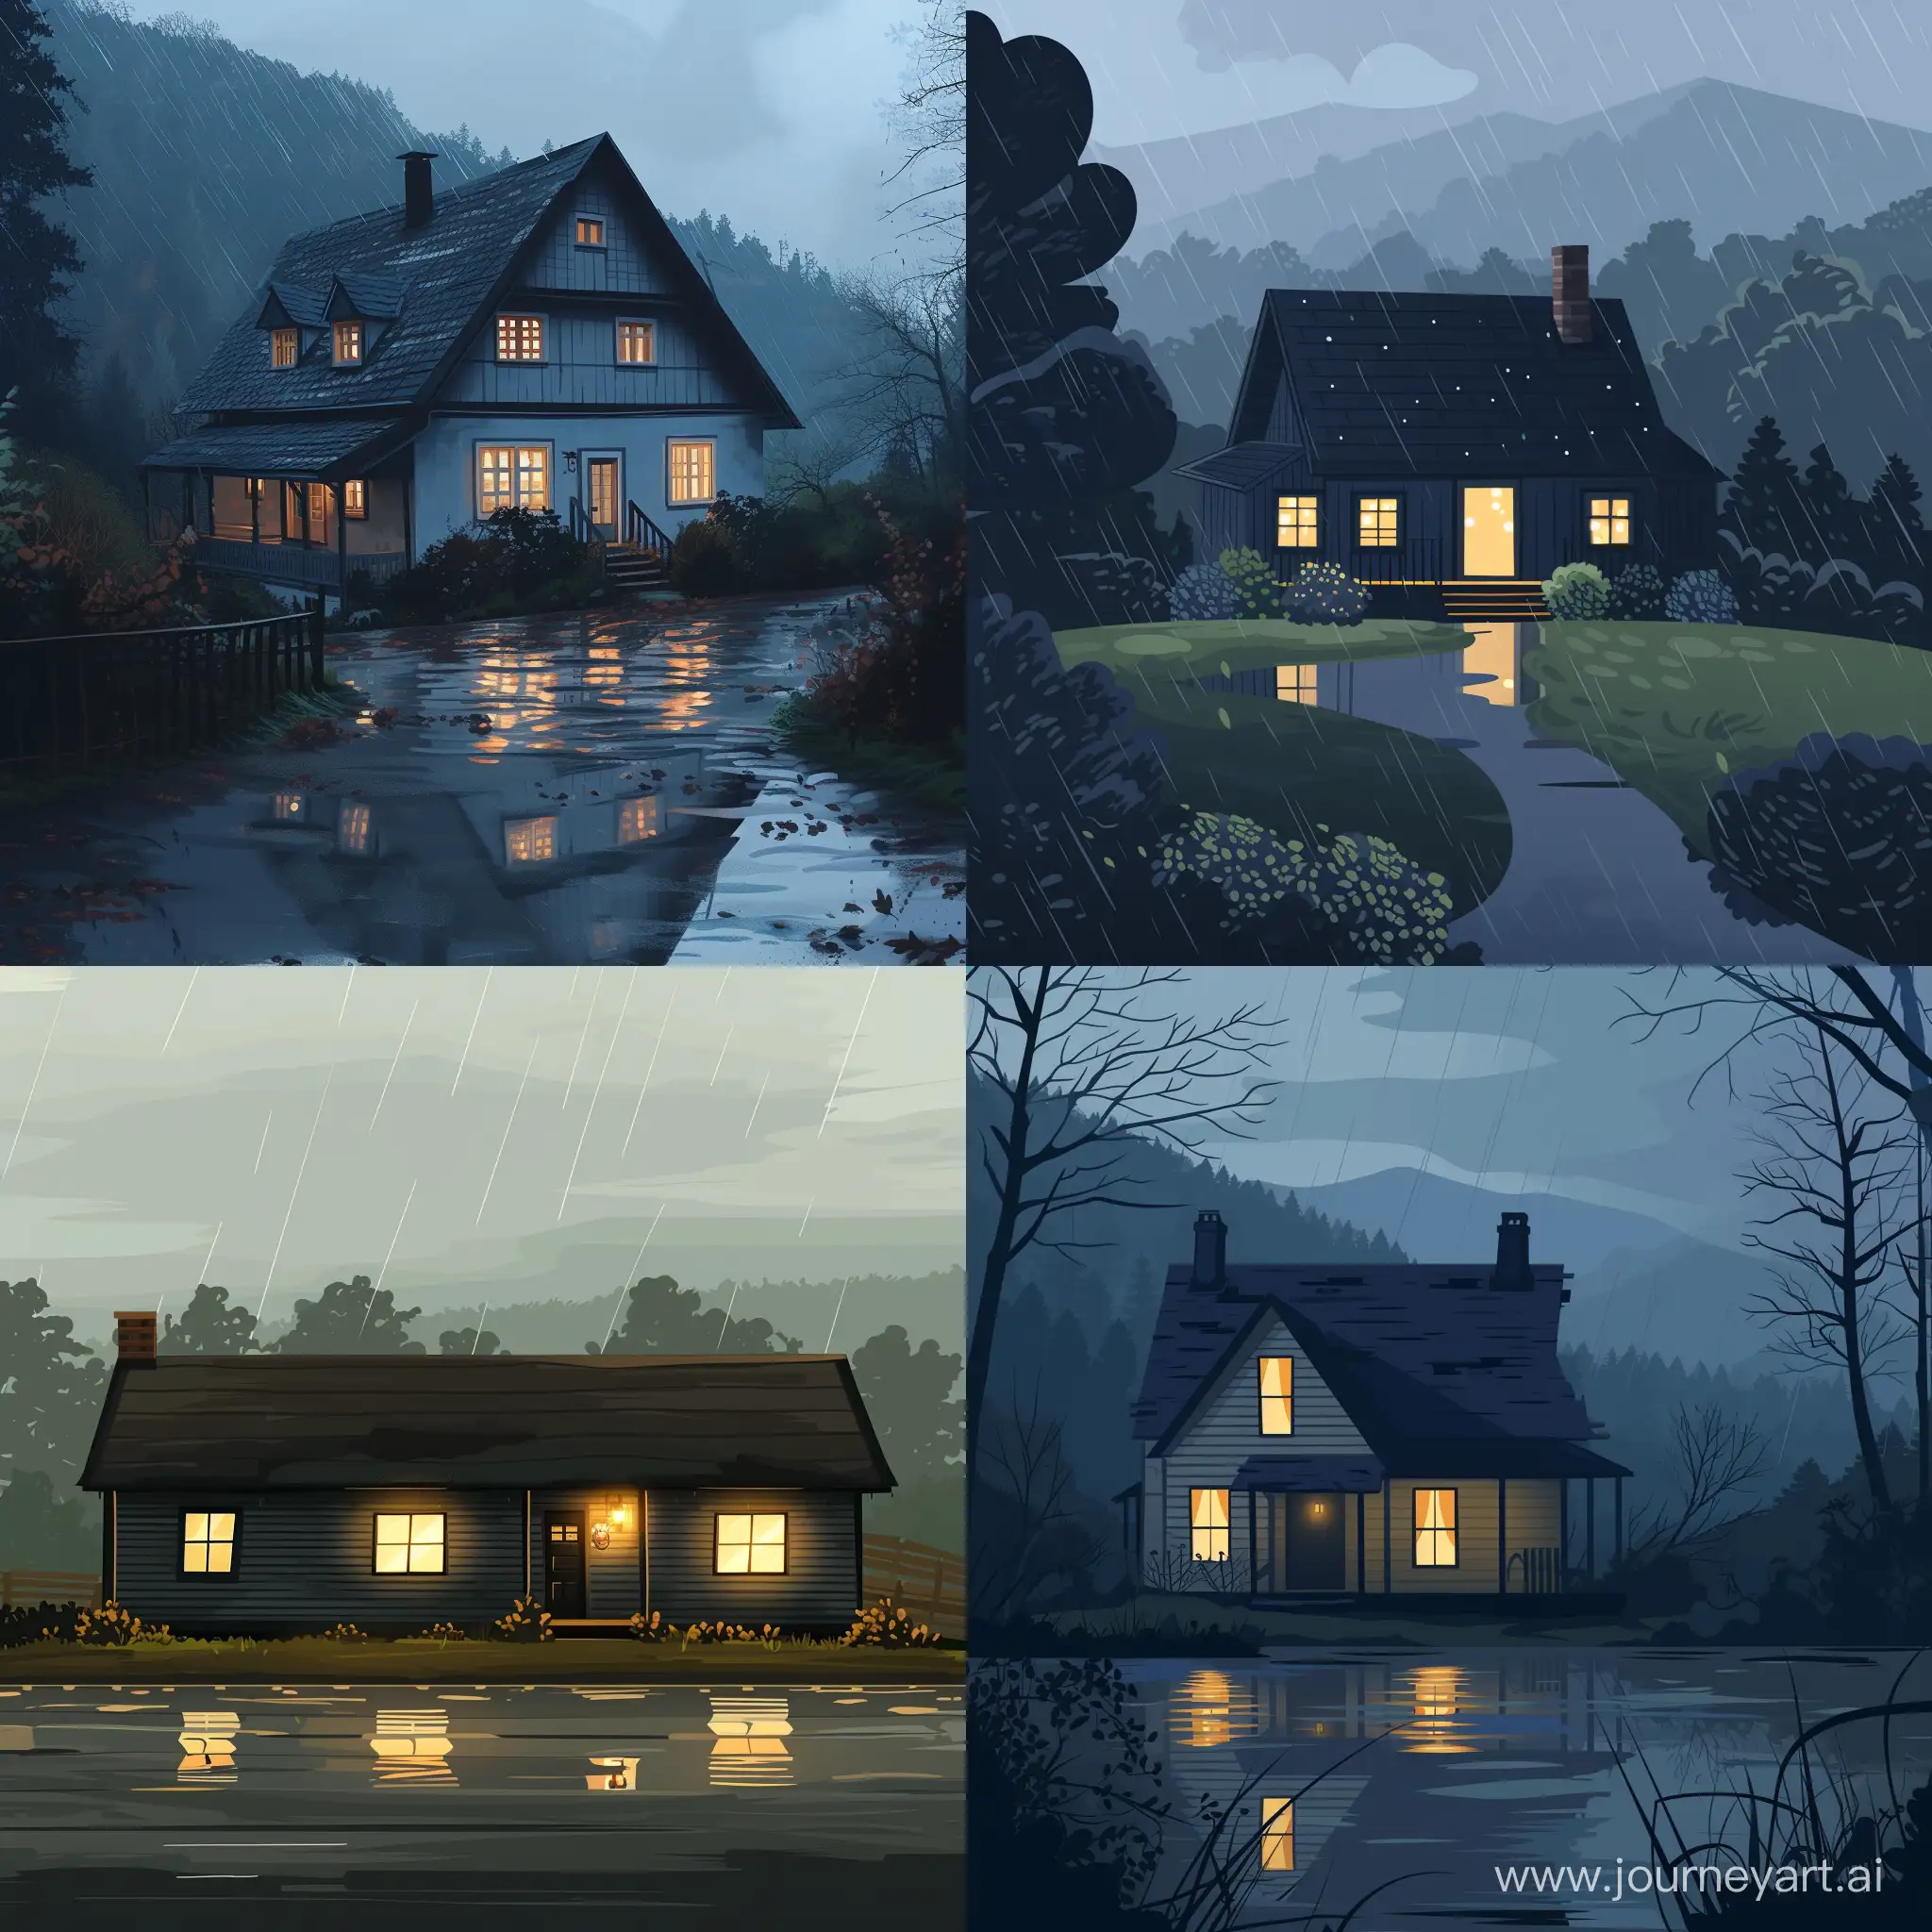 old cottage in the mount, lights on in the windows, scenery after the rain, wet surroundings, in flat style